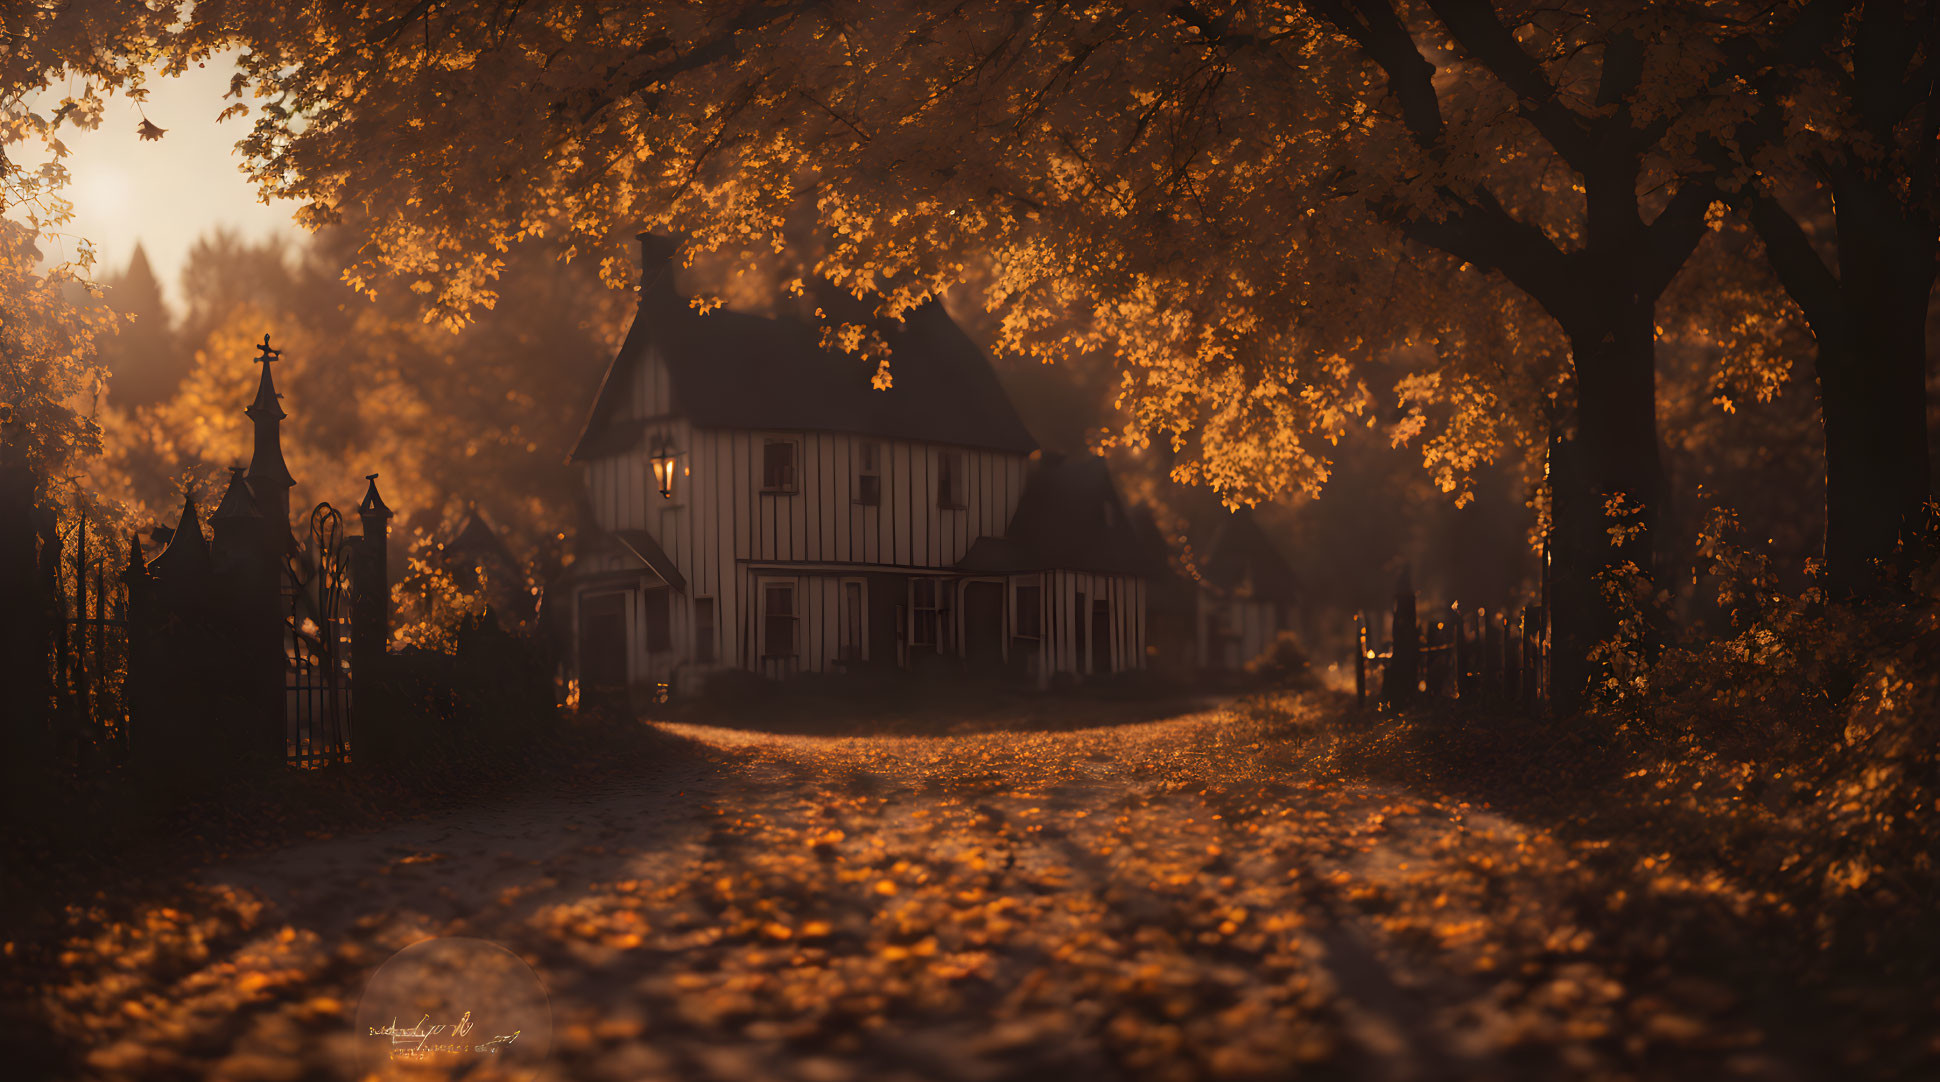 Tranquil autumn landscape with vintage house and golden trees